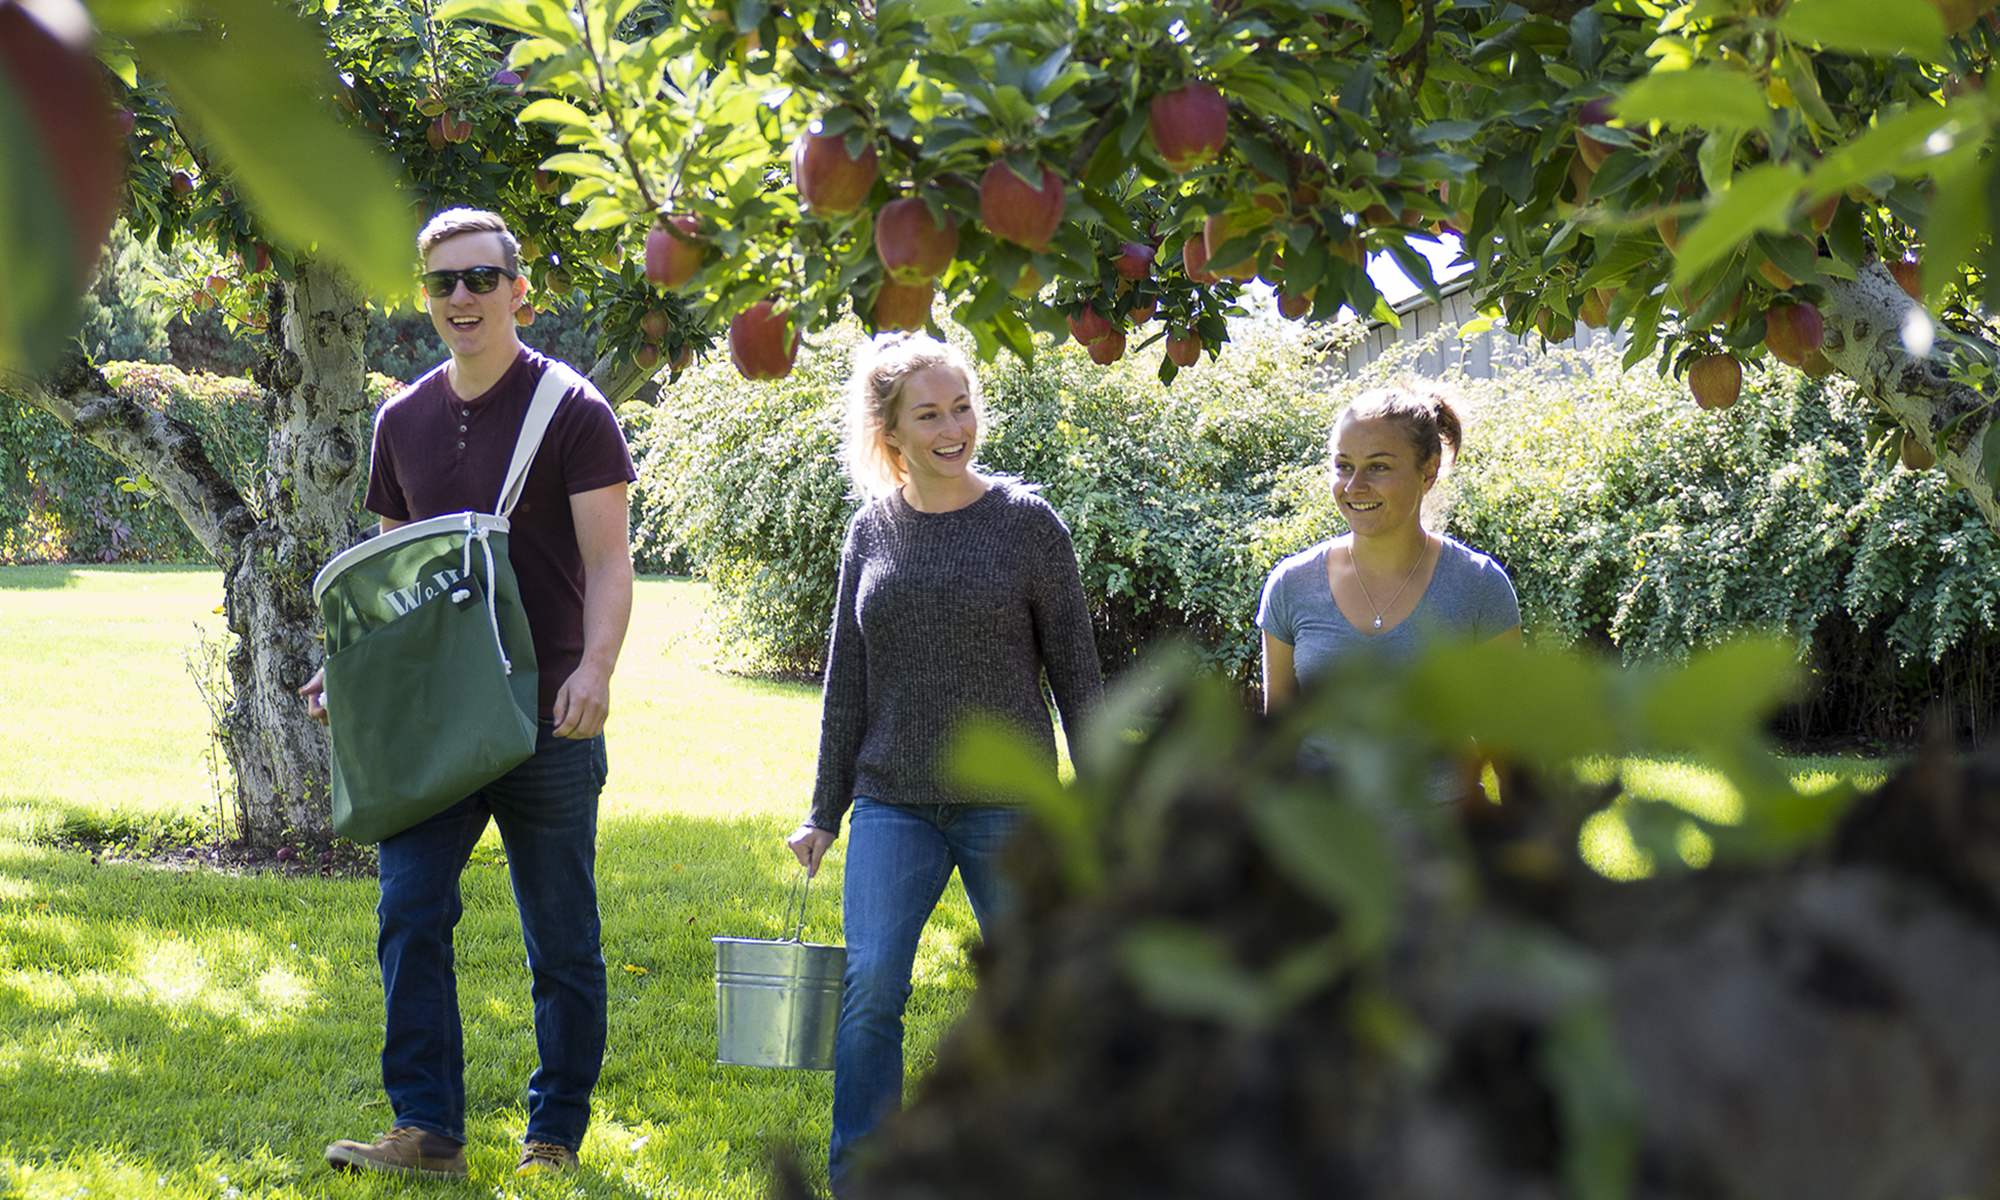 Three students walking through an apple orchard